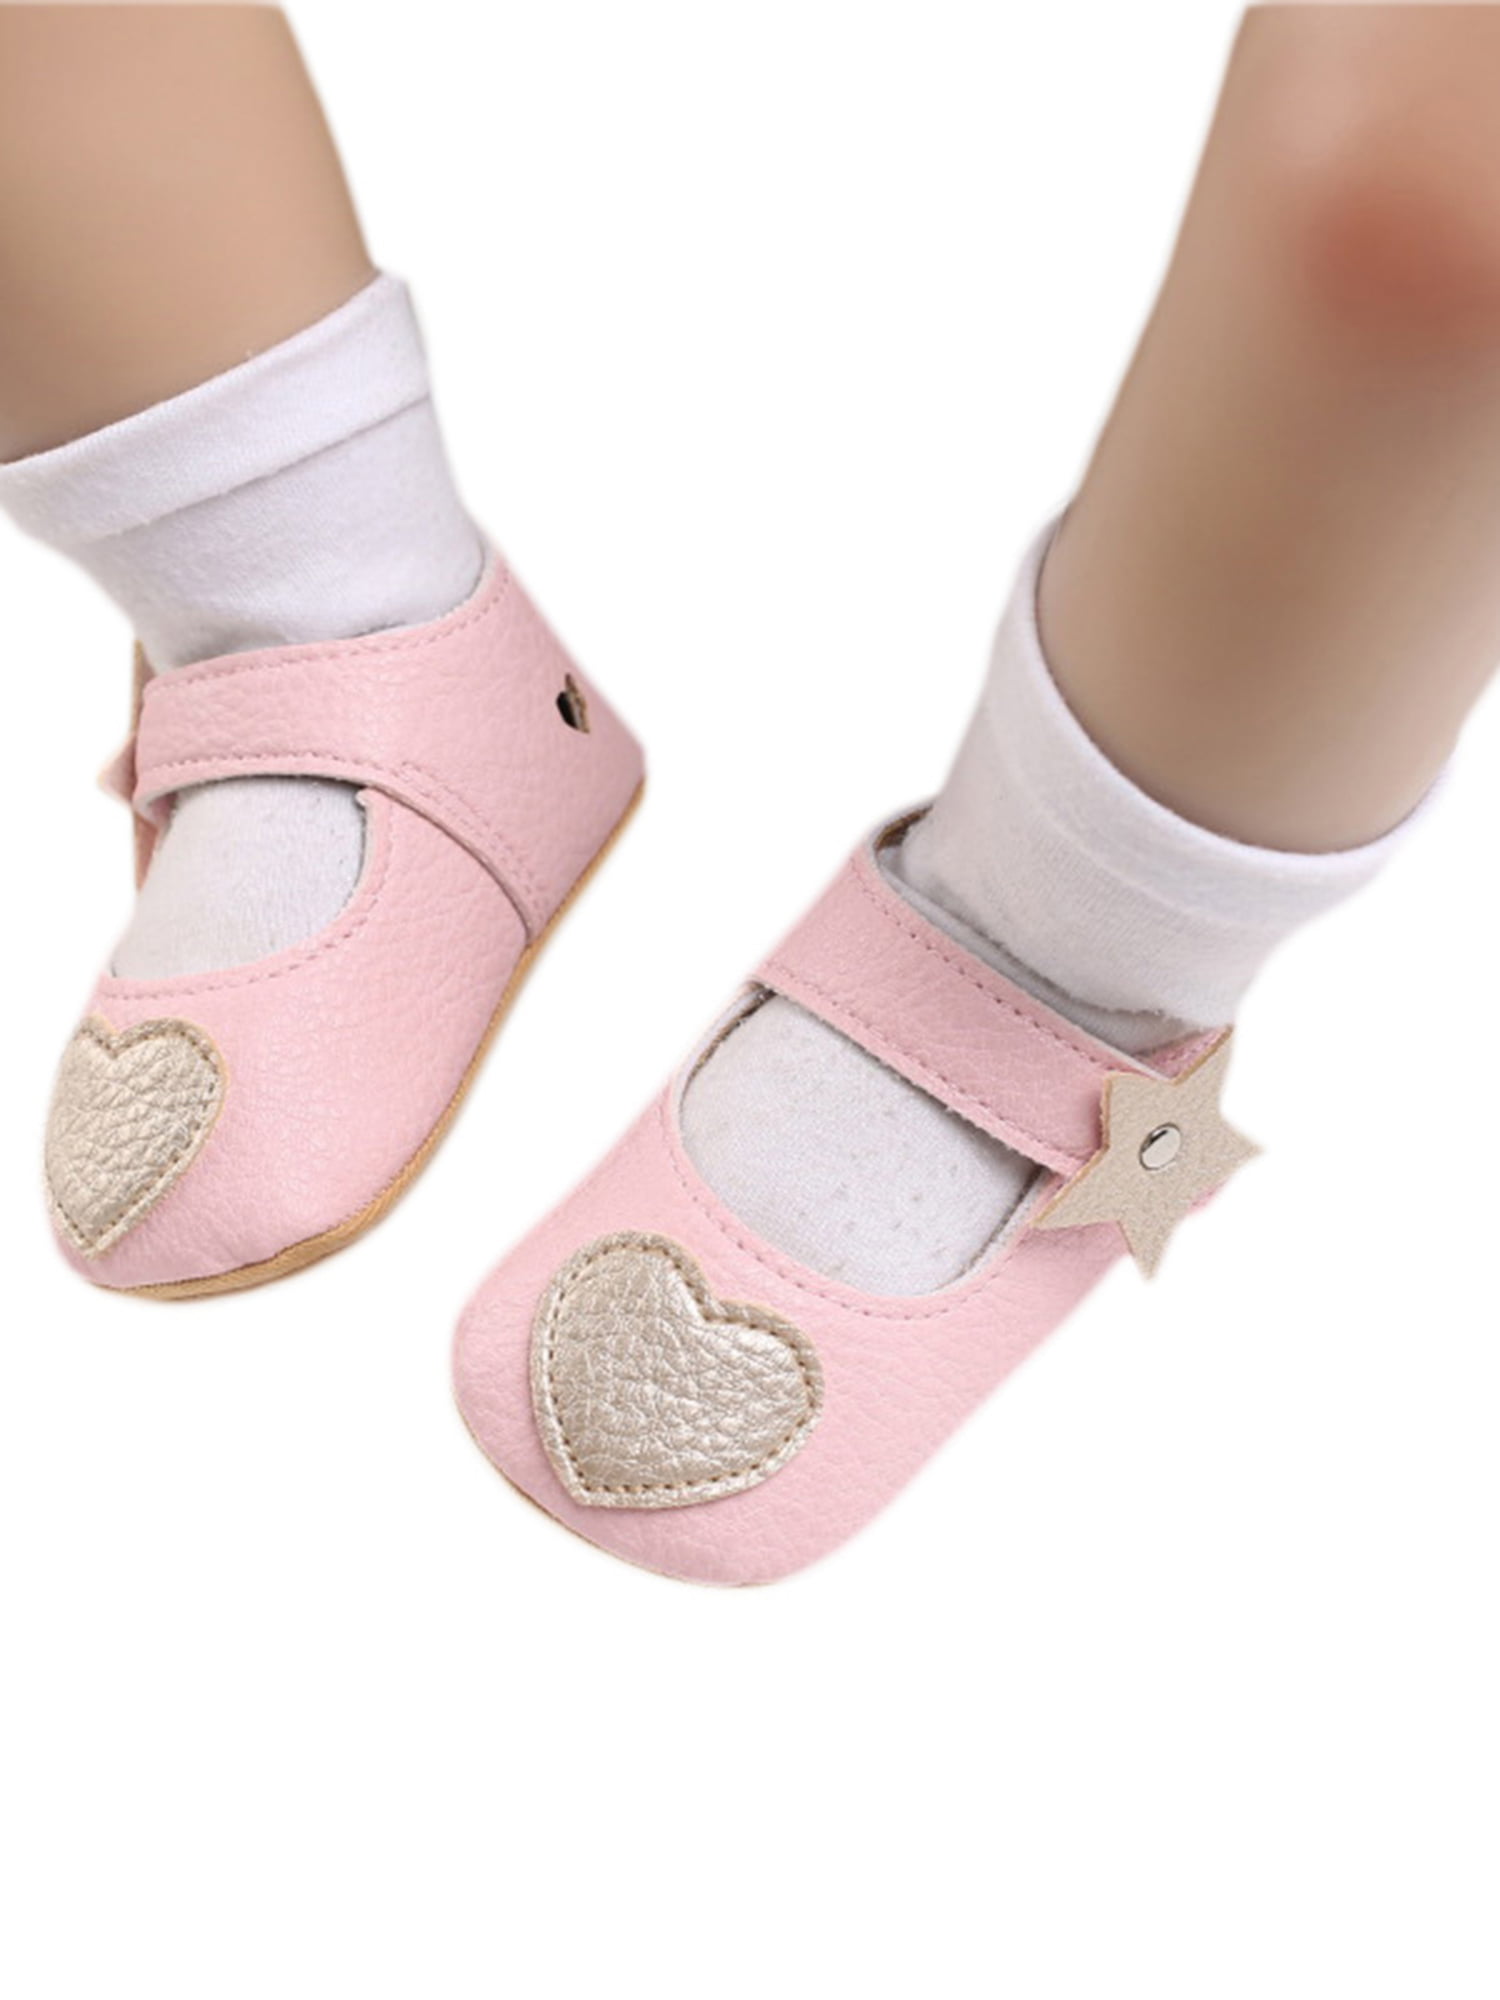 Newborn Baby Toddler Girls Crib Shoes Soft Sole Moccasins Heart Shaped Princess 